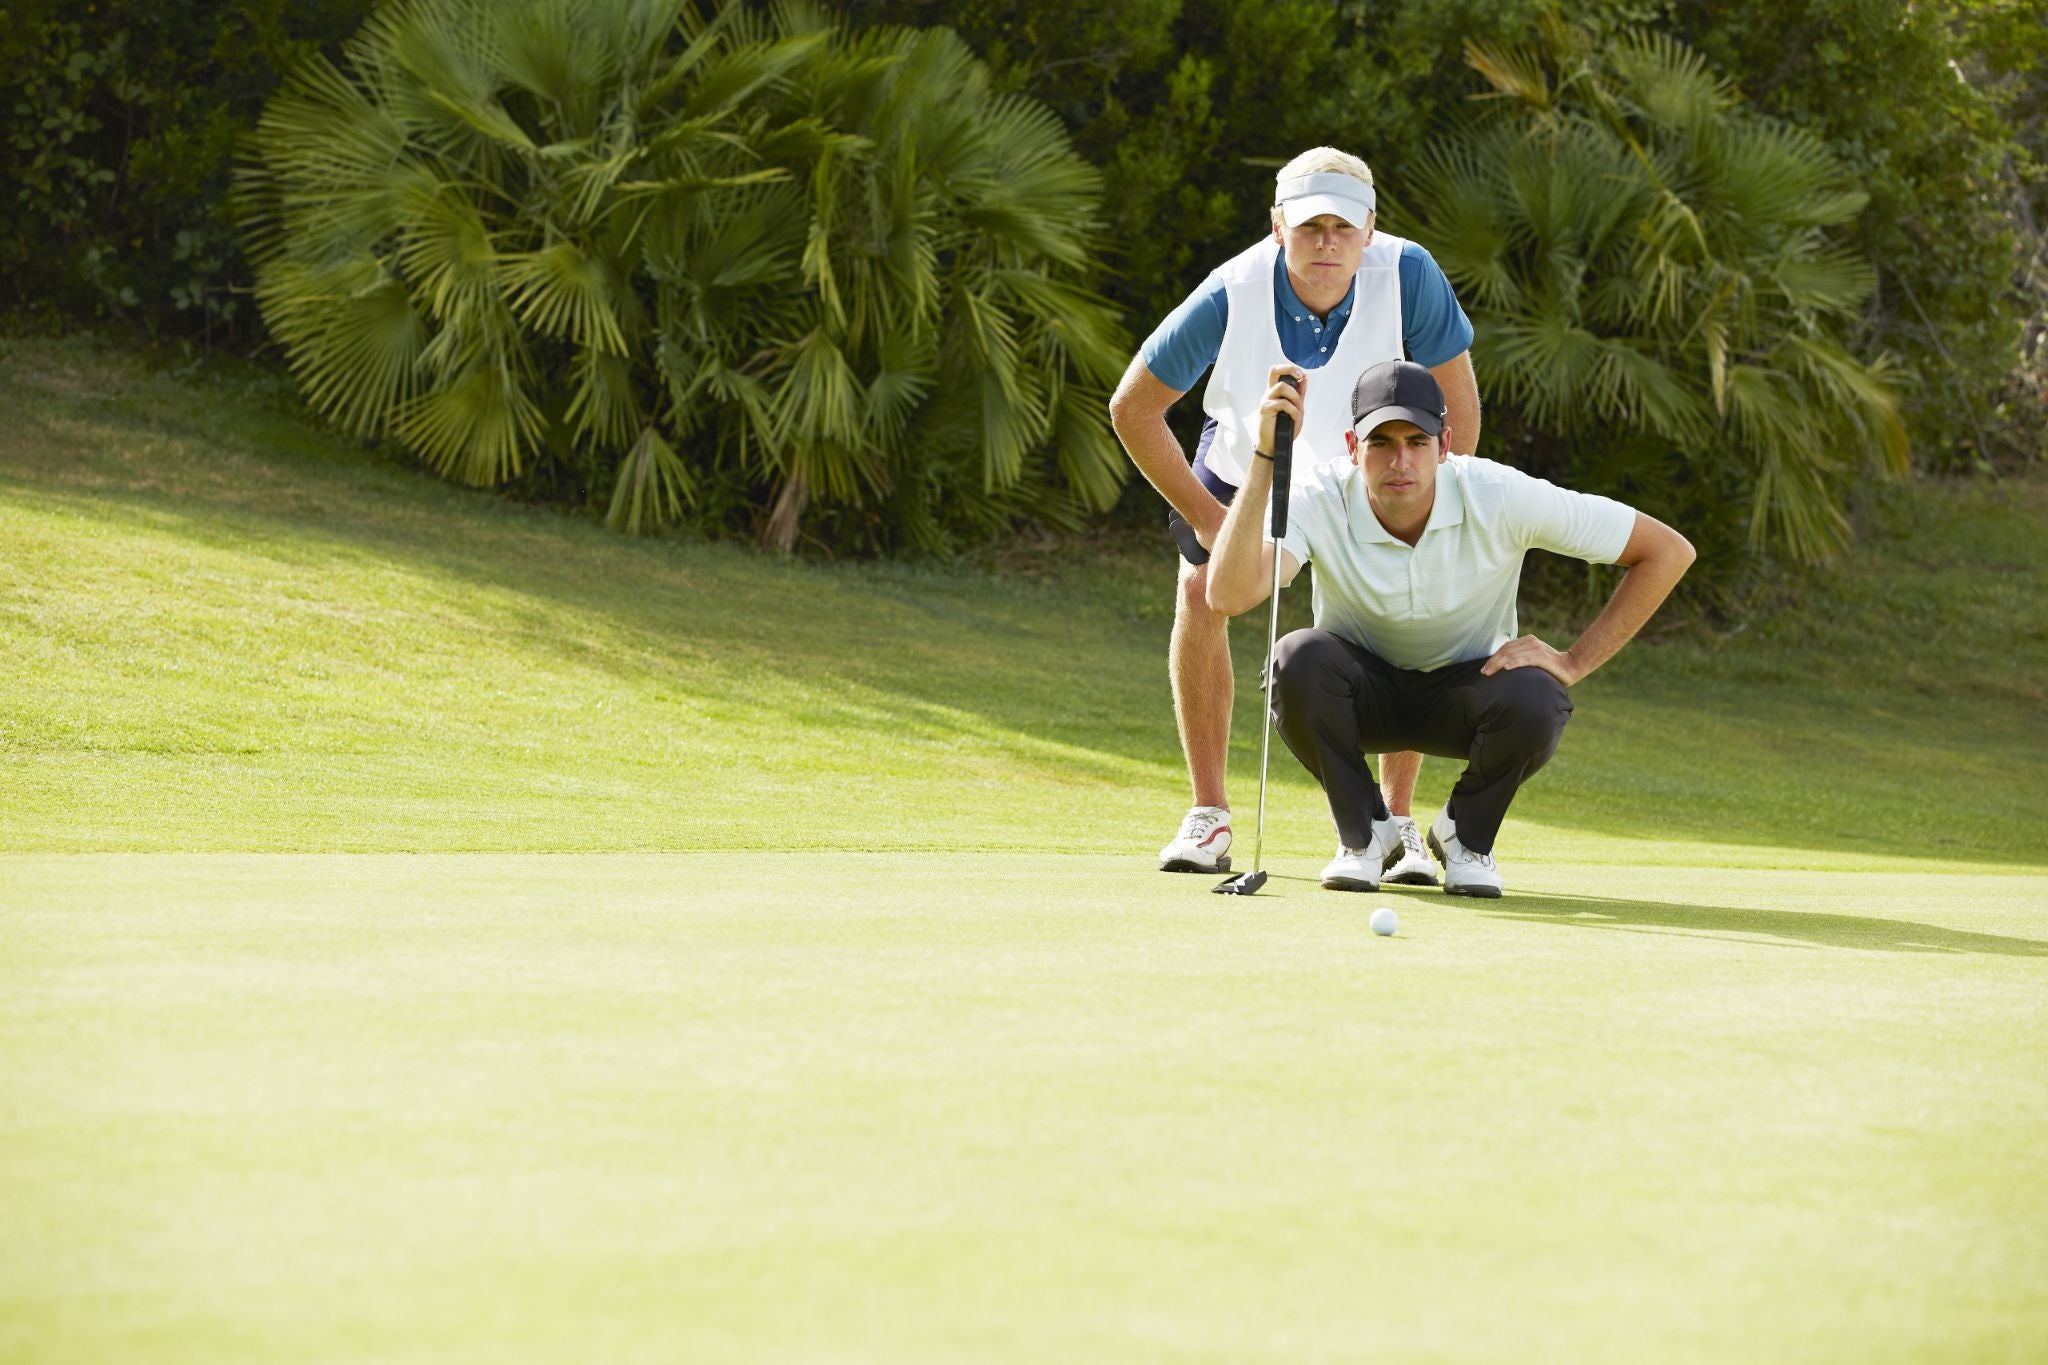 Two men anxiously watching a golf ball rolling towards the hole on the green